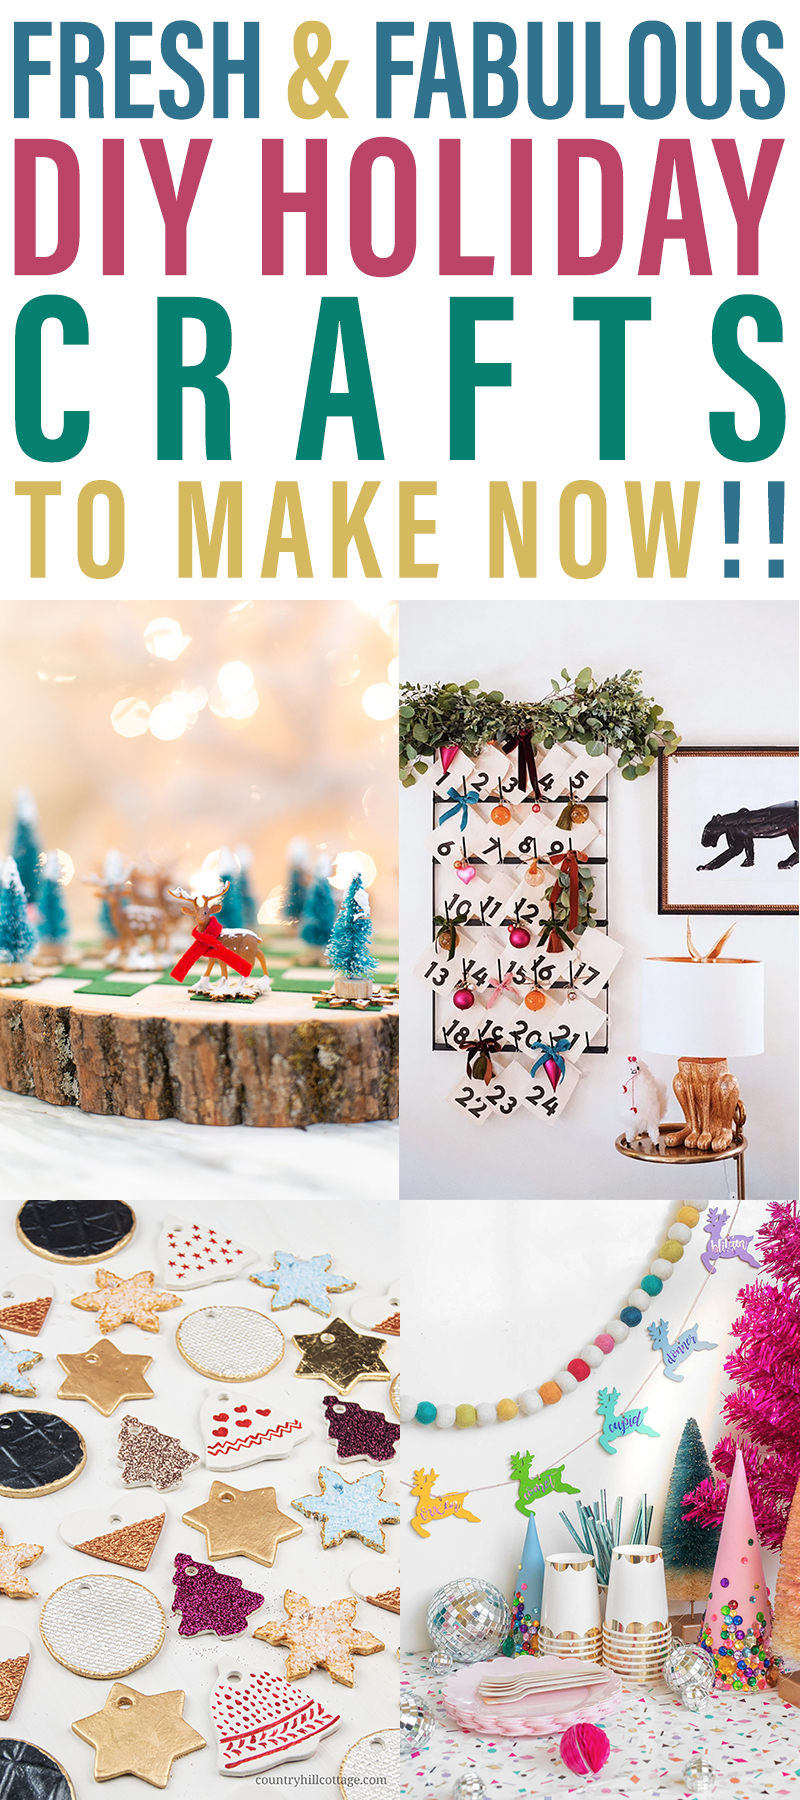 It’s time for some Fresh and Fabulous DIY Holiday Crafts To Make Now.  Come and check out some brand new Holiday and Christmas crafts that are hot off the presses!